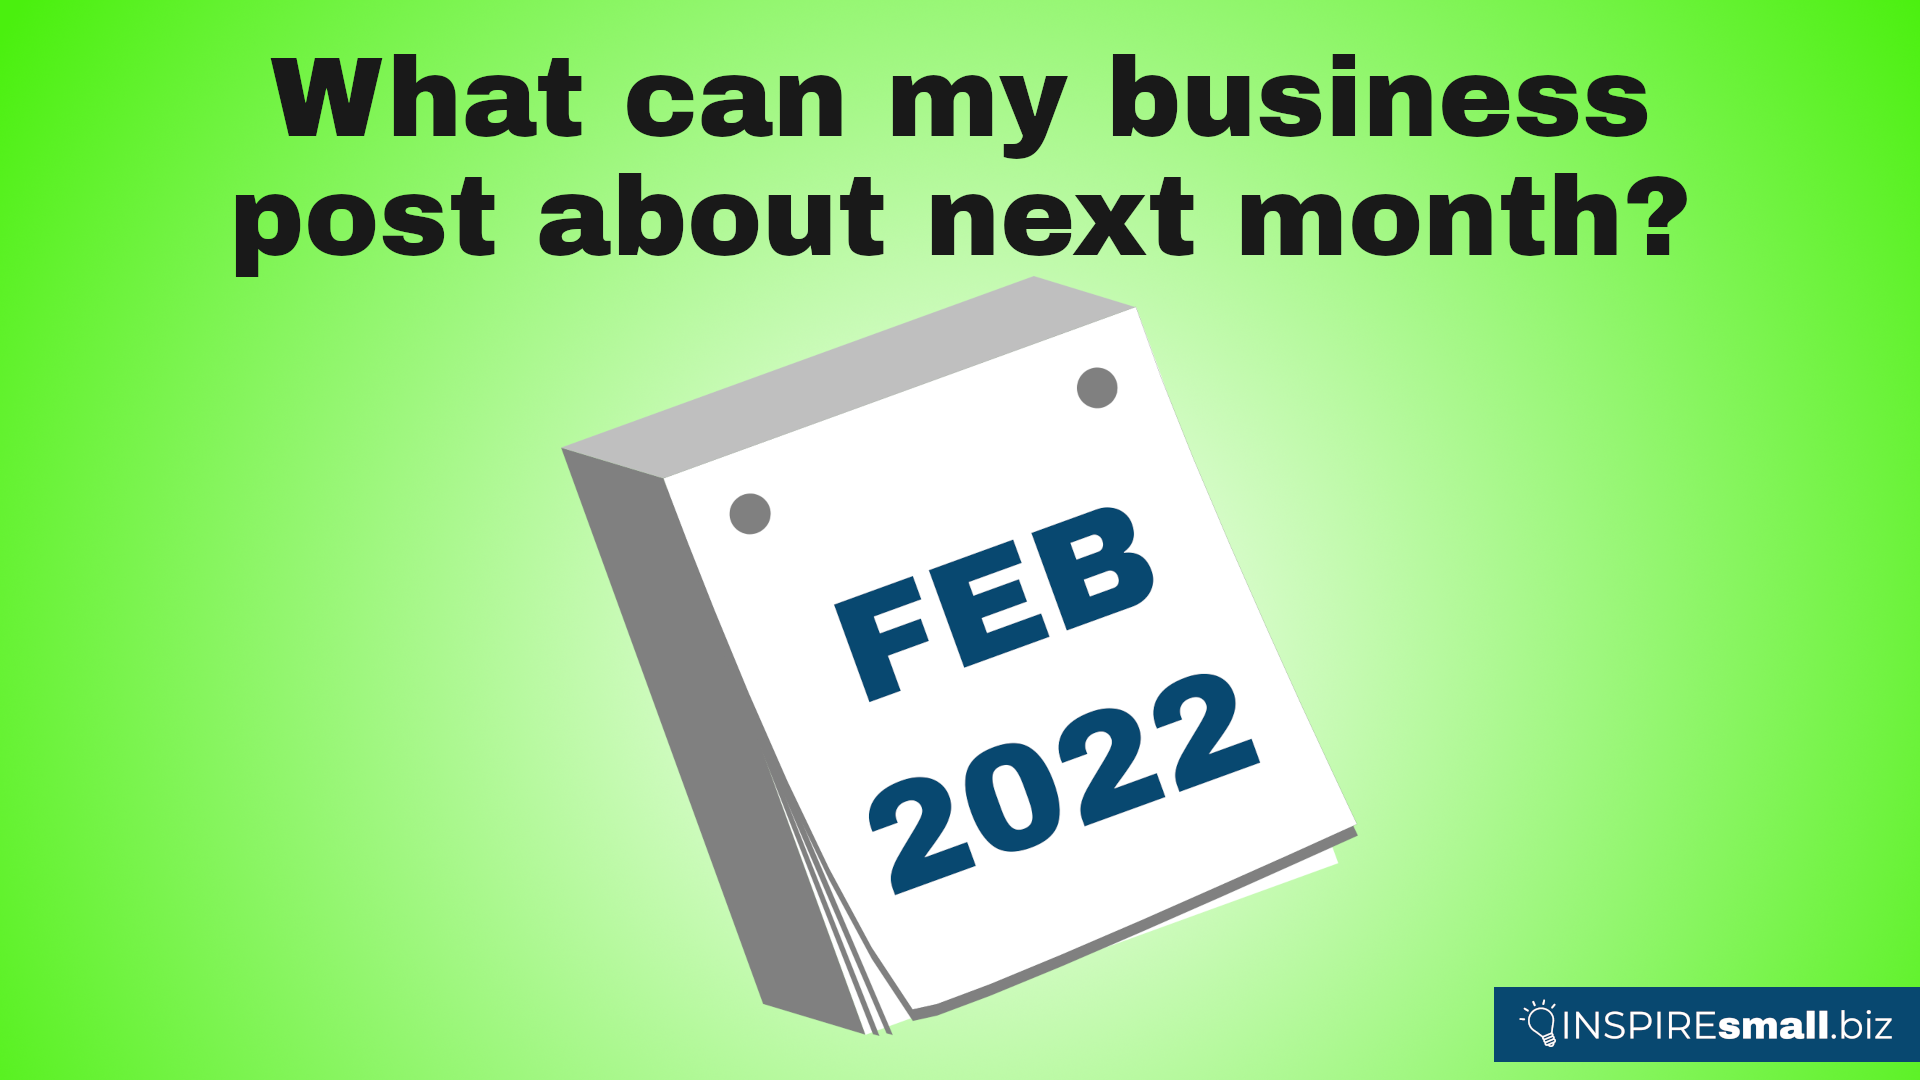 What can my business post about next month? February 2022